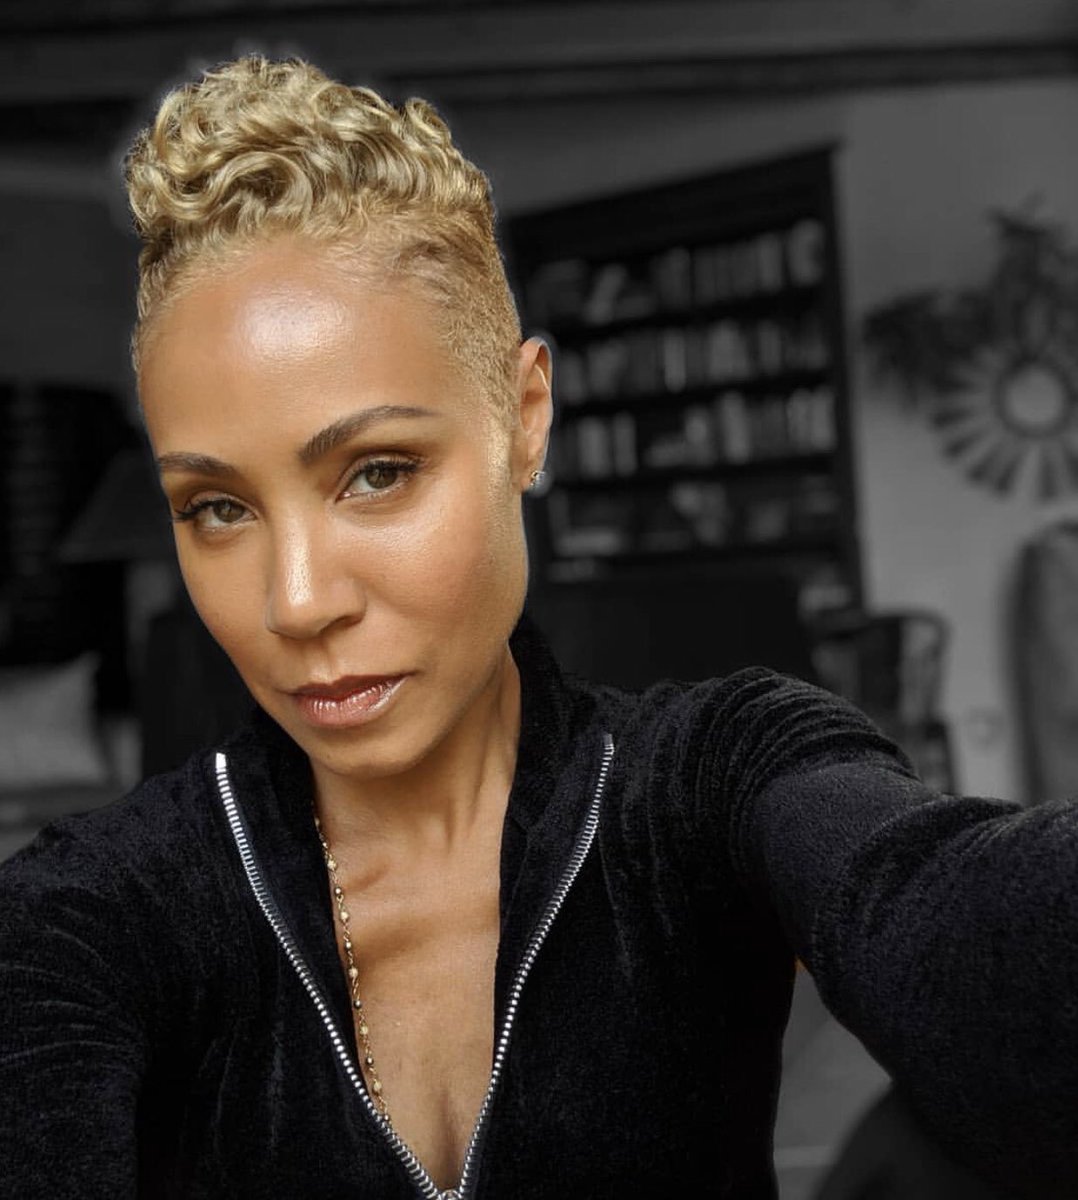 JADA PINKETT SMITH: to this day, she is one of very few black women to adopt the “final girl” trope in a horror film, and her appearance and death in the opening of SCREAM 2 remain fan favorites within the franchise.